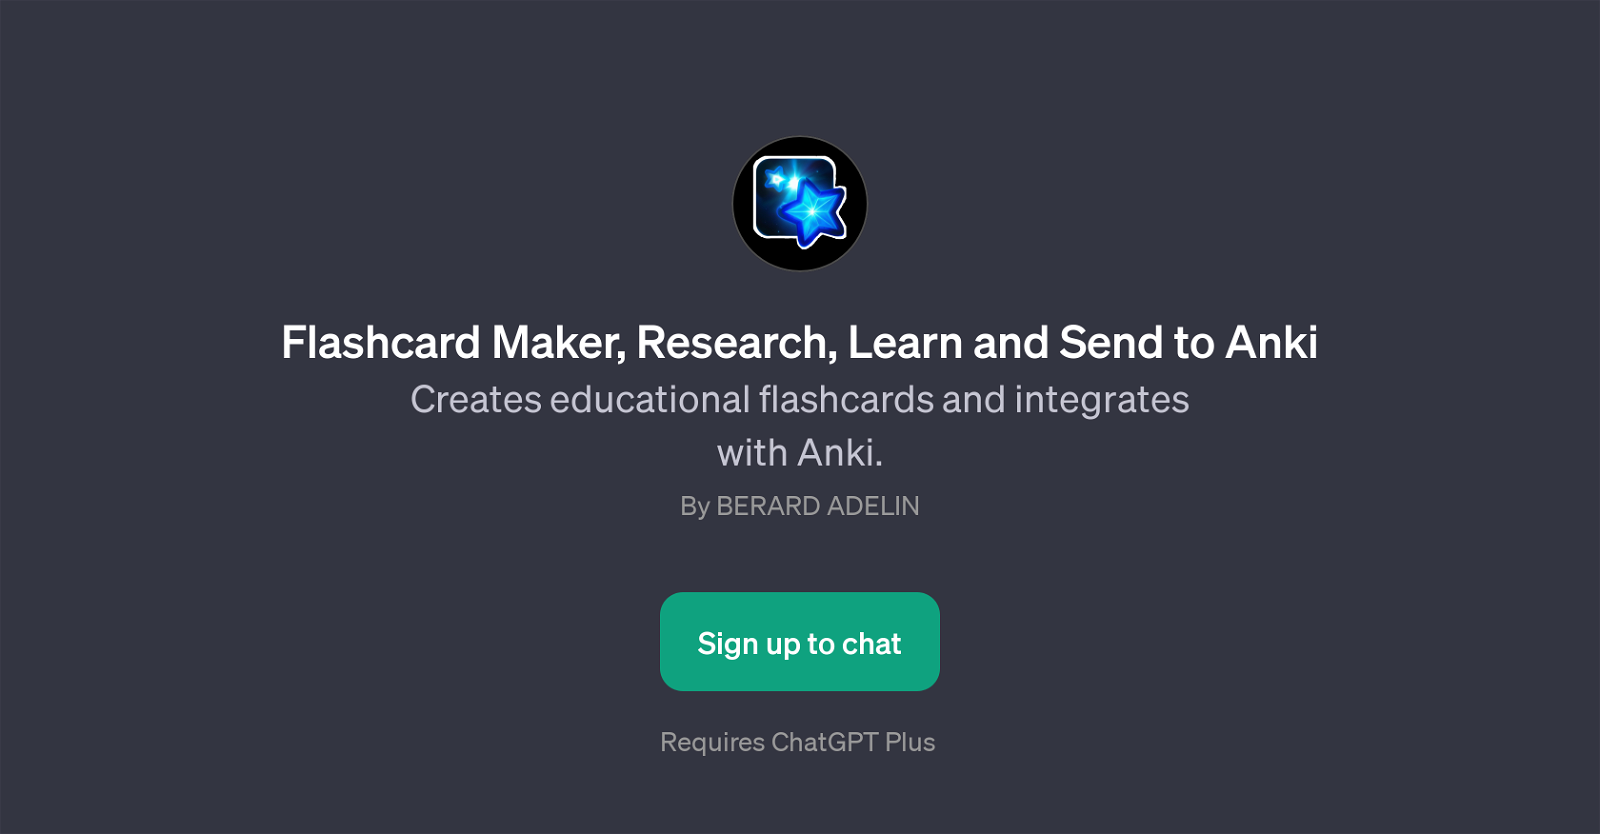 Flashcard Maker, Research, Learn and Send to Anki website